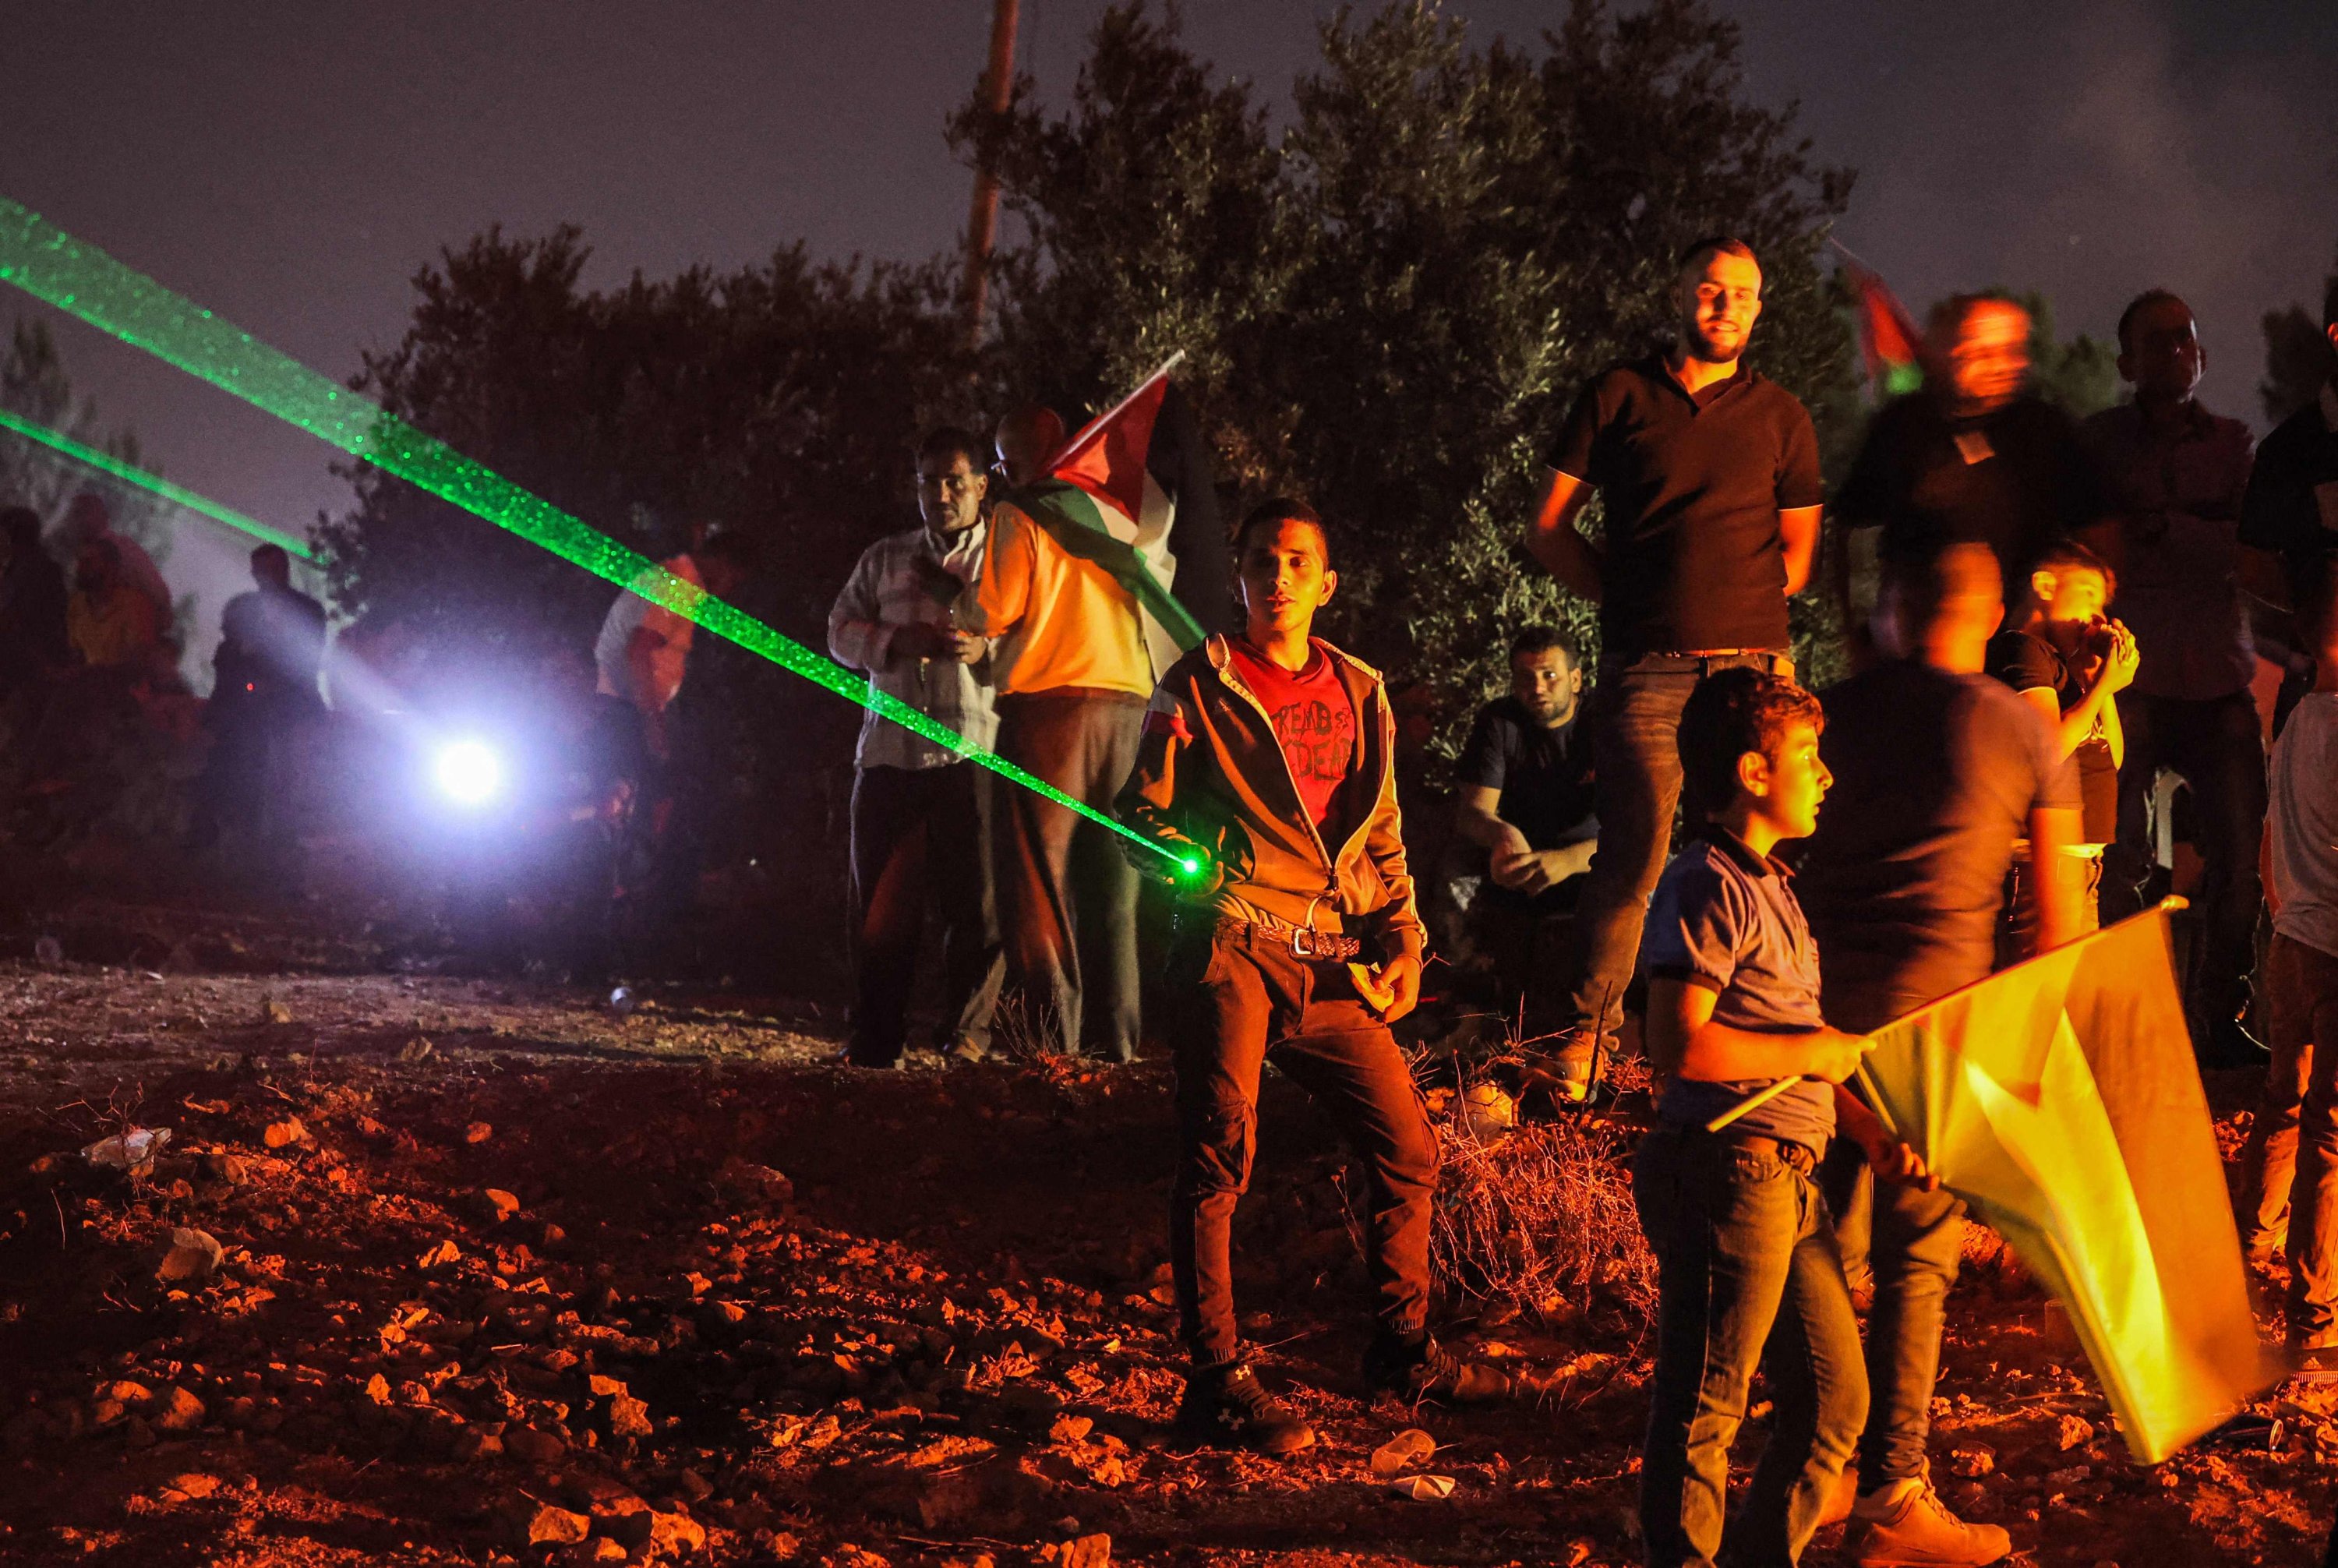 Palestinian protesters use laser torches during a demonstration against the Israeli settlers